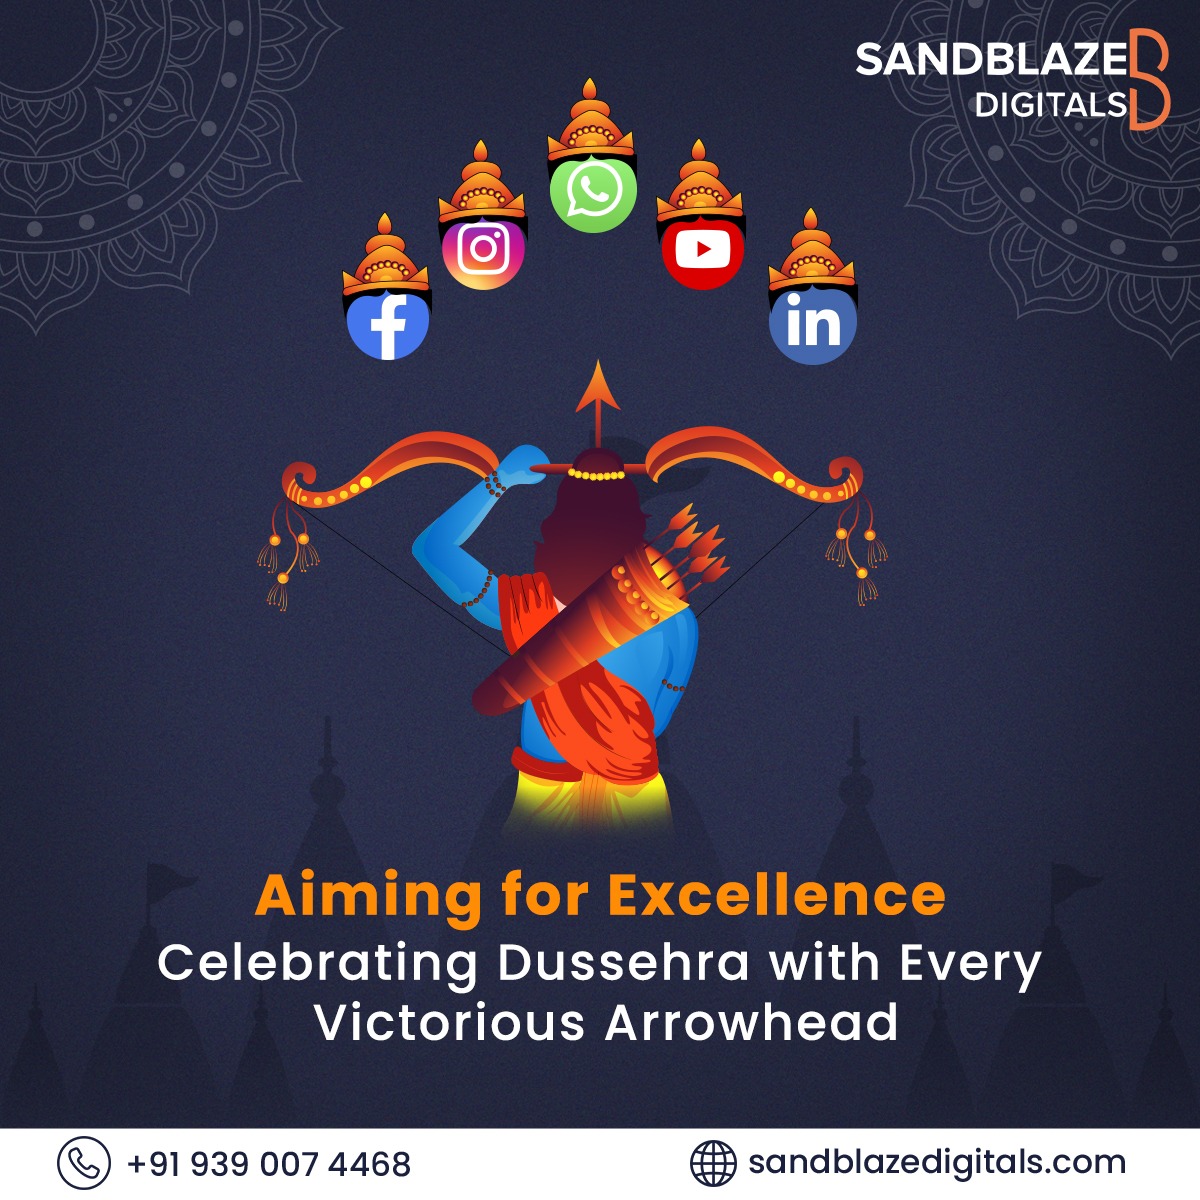 As we celebrate the triumph of Lord Rama over challenges, we're driven to help your #brand master the digital realm. 

Contact us @09121678789 today to schedule a consultation and get started on your #digitalartmarketing journey.

#HappyDussehra #VijayaDasami #sandblazedigitals